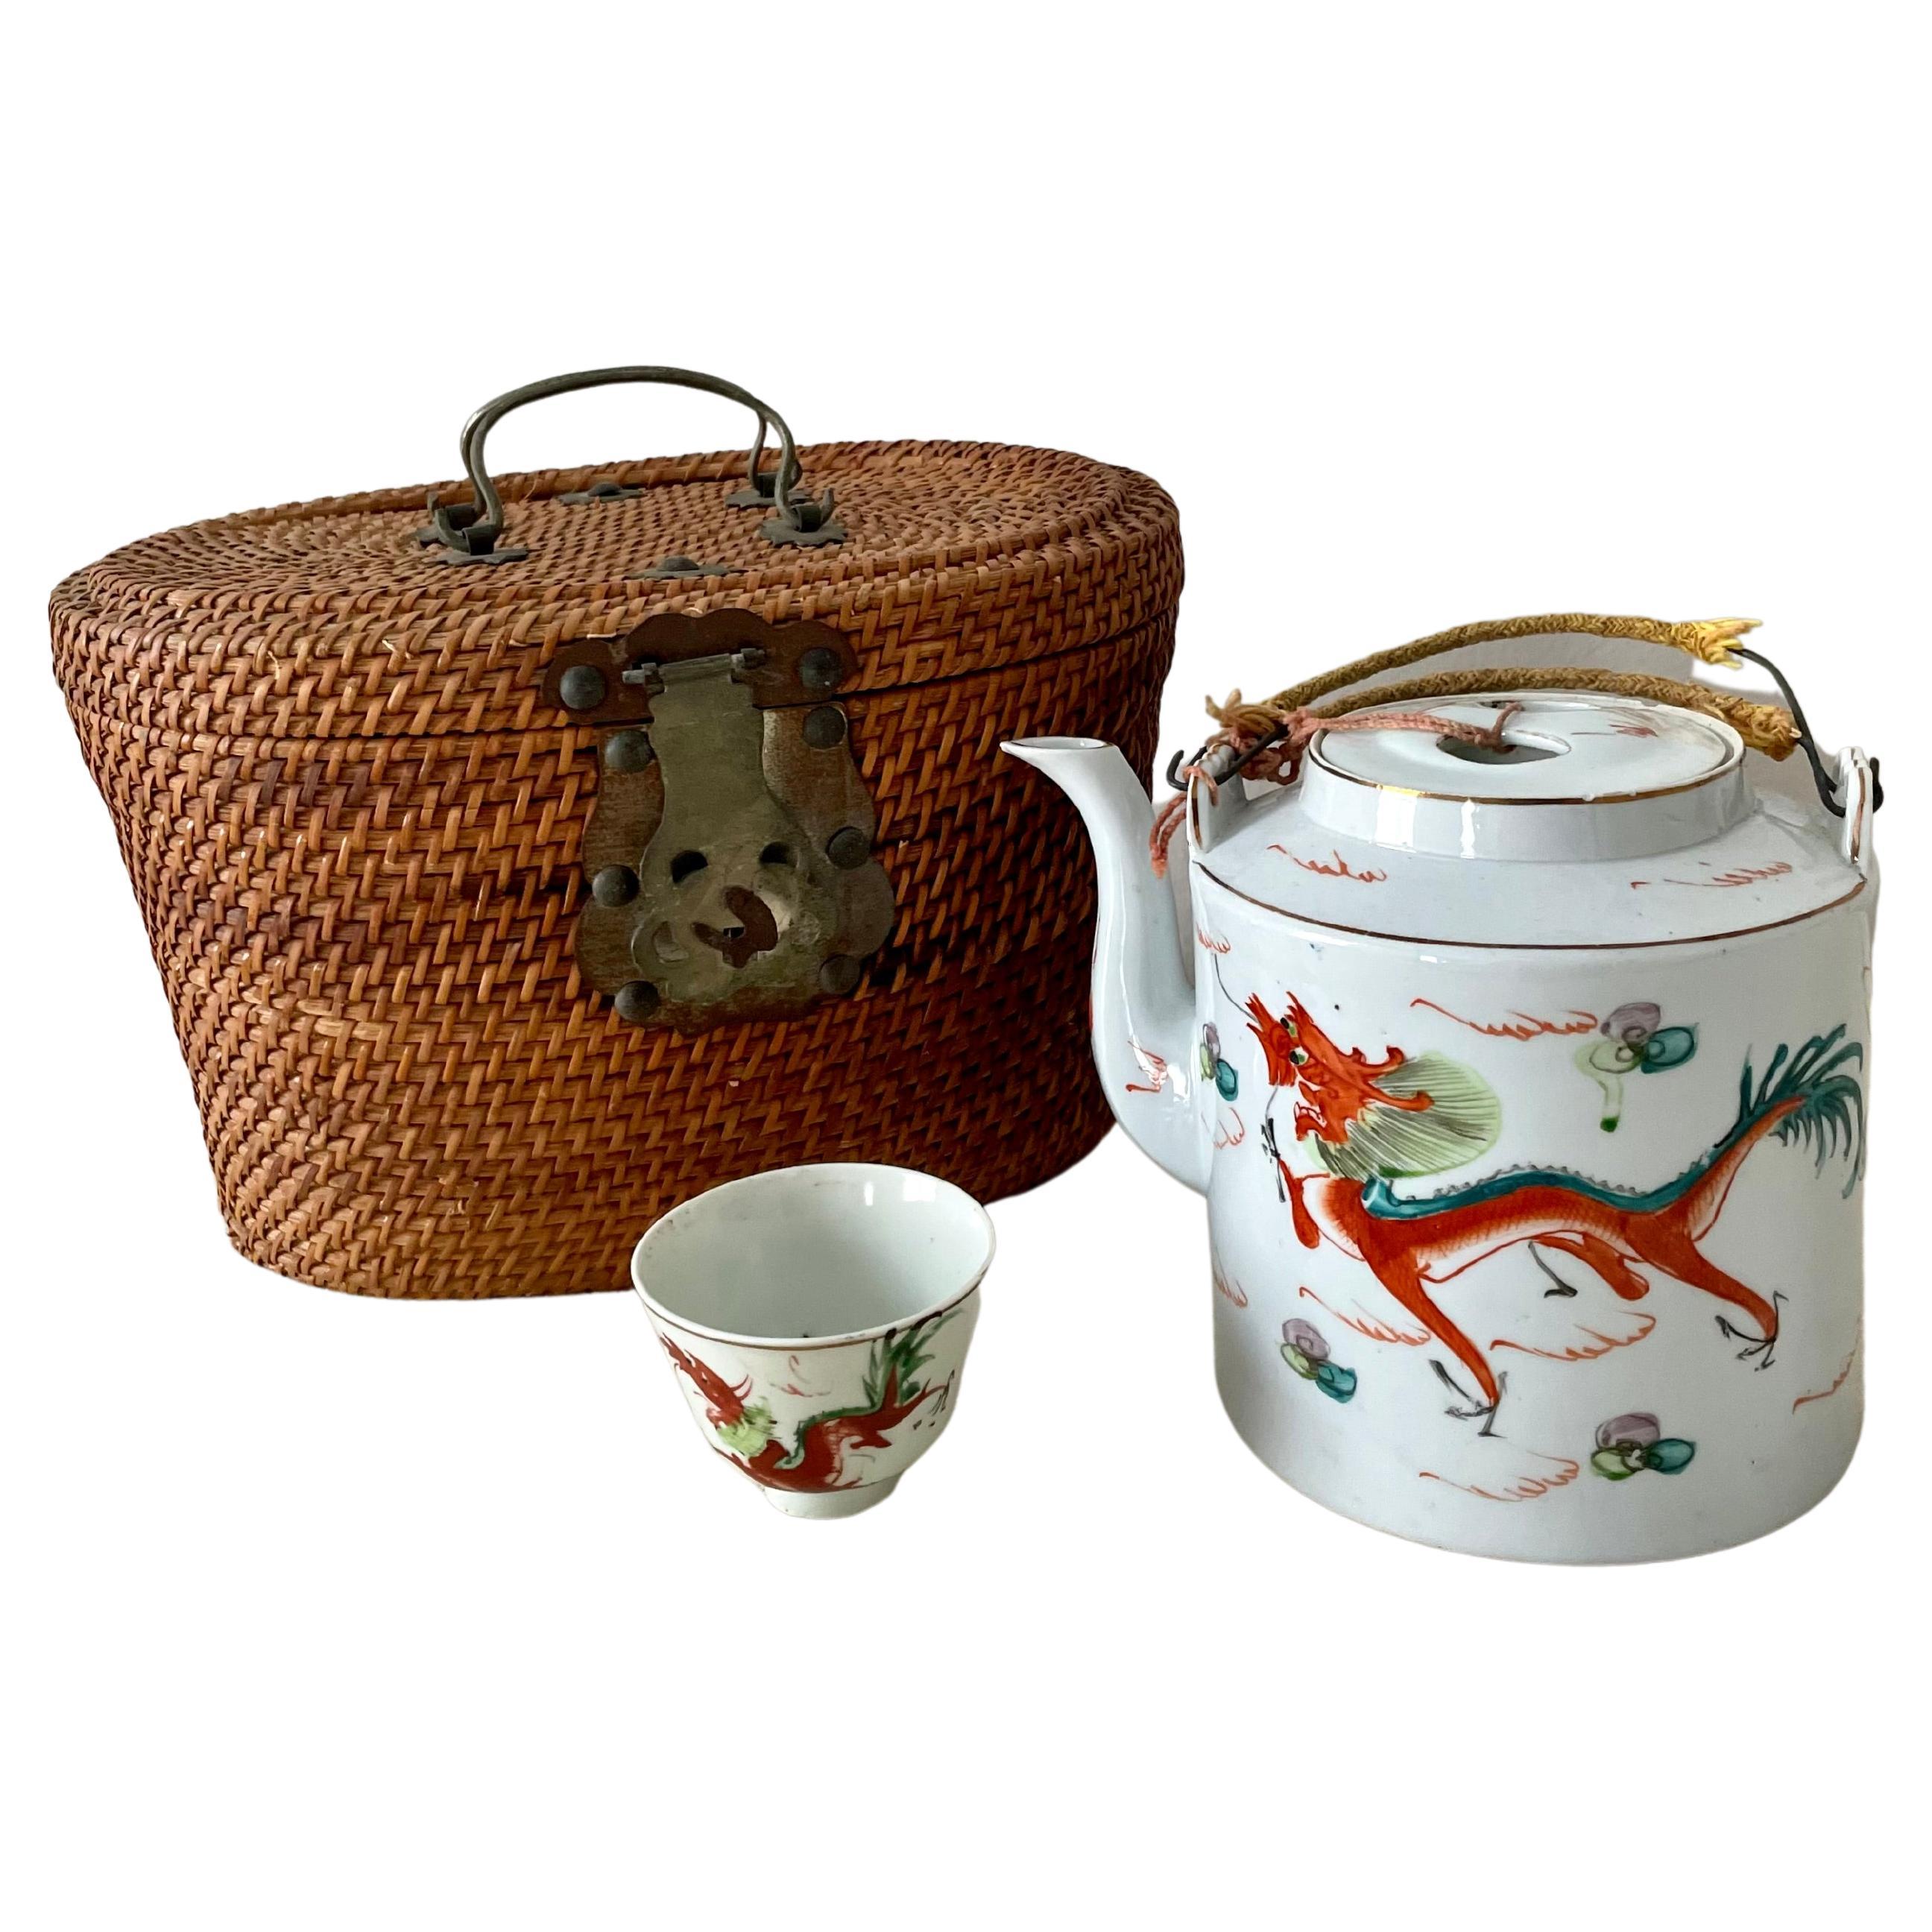 Asian Tea Set with Hand Woven Wicker Carrying Warmer Basket, Teapot and Mugs For Sale